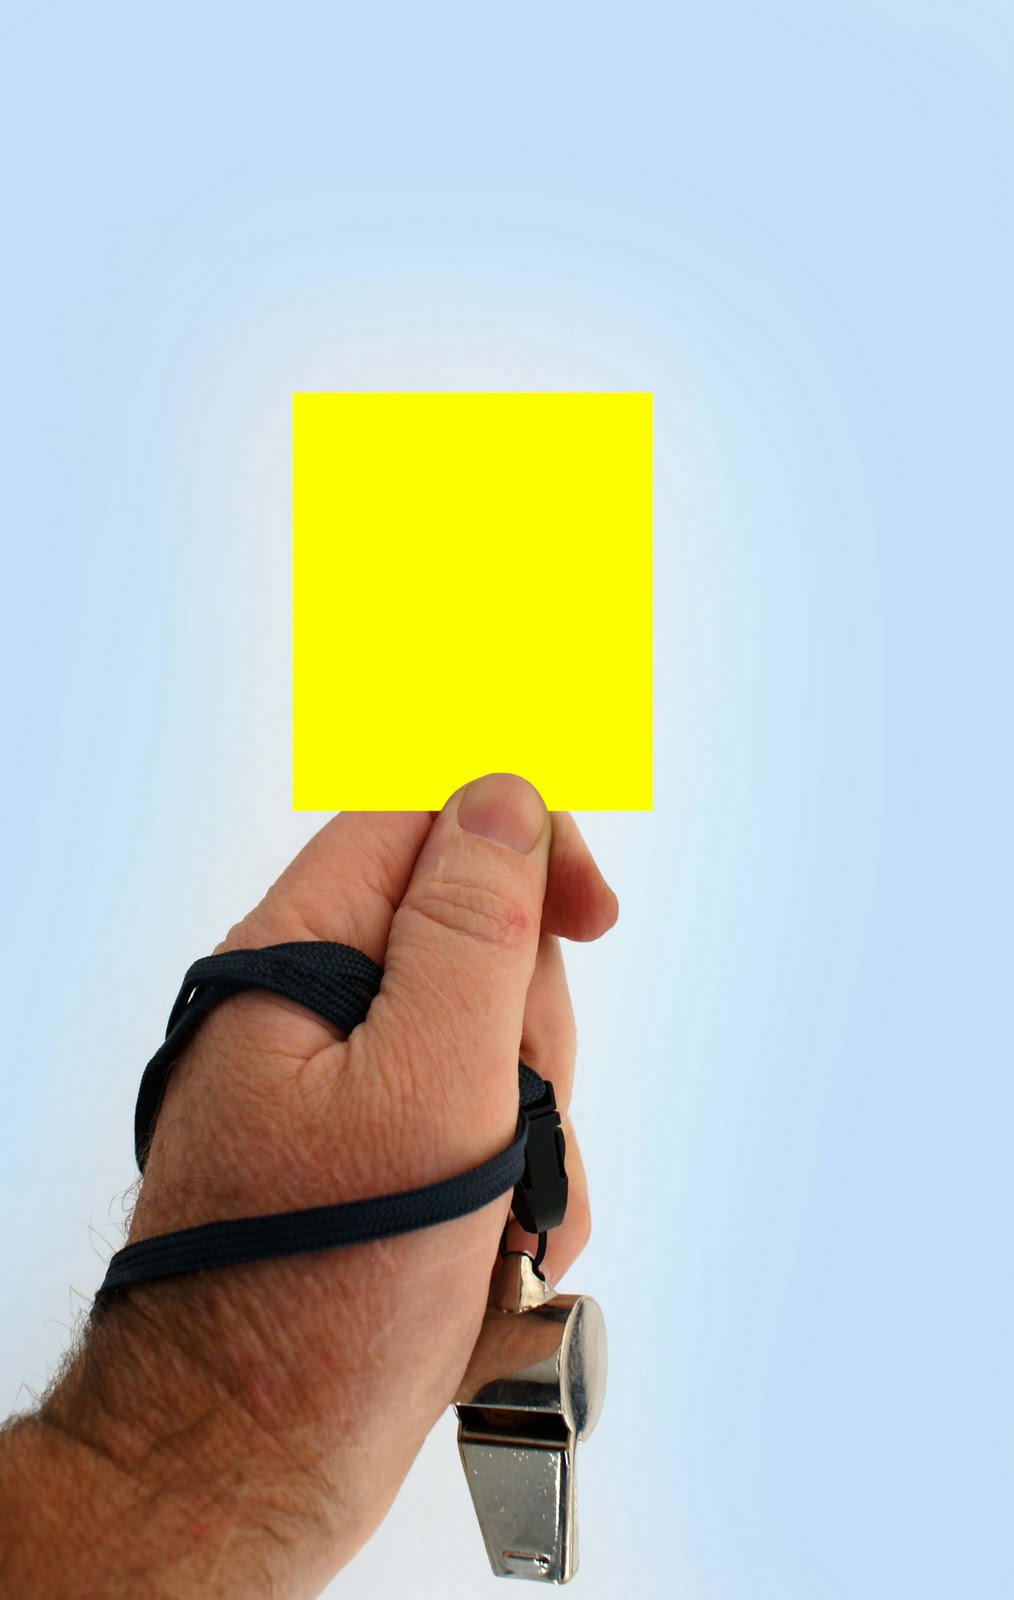 Eastside FC News: The Yellow Card